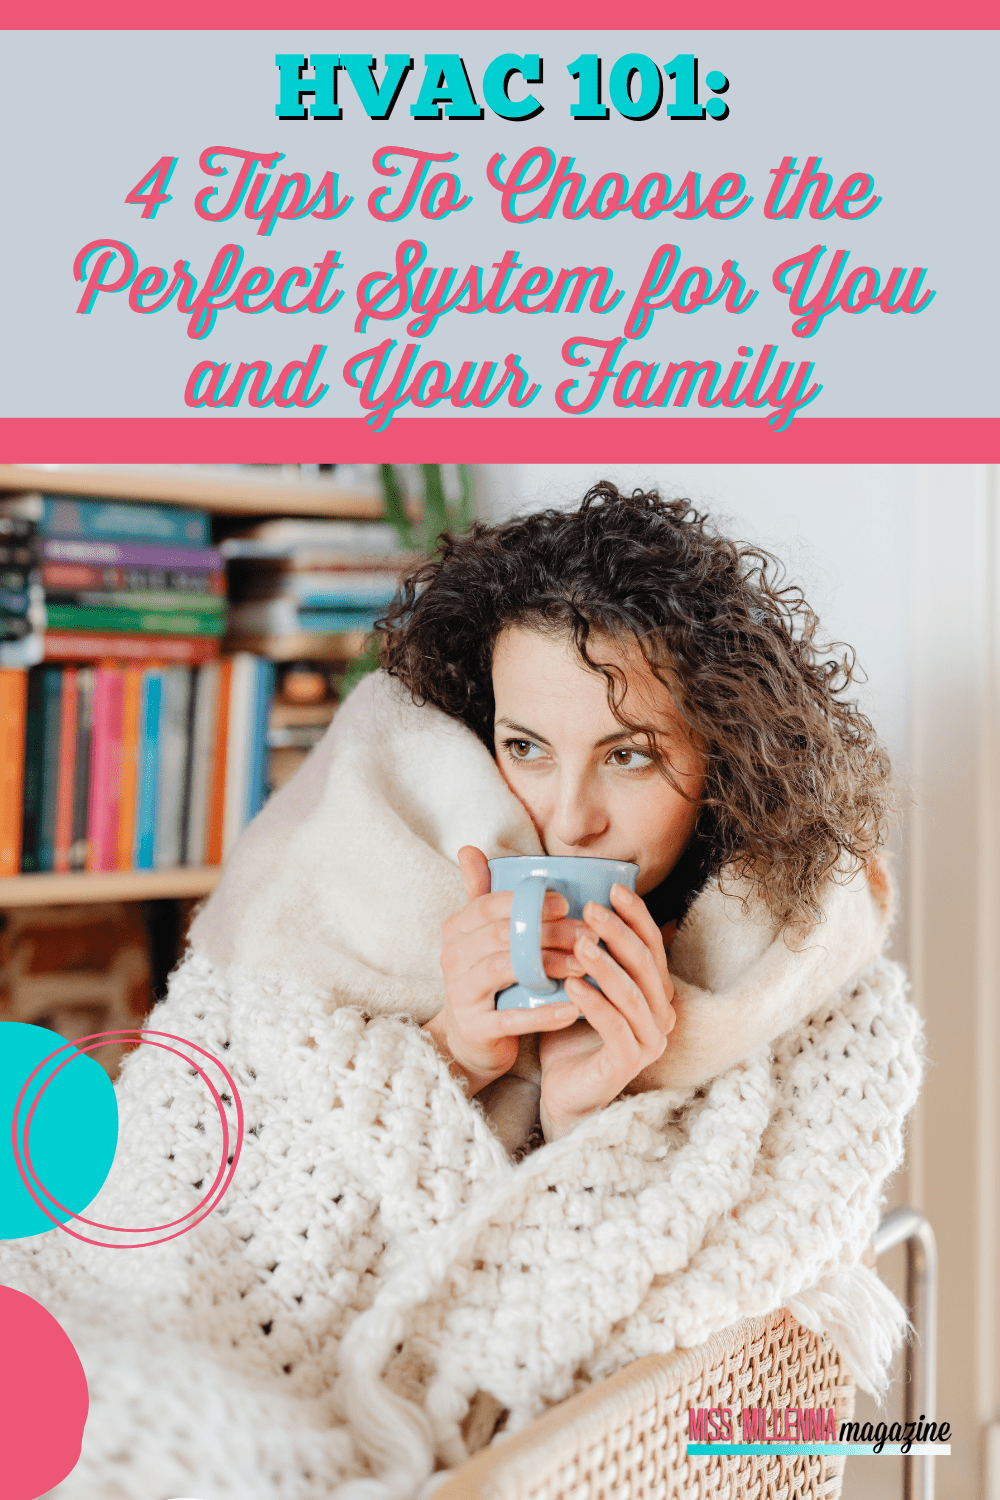 HVAC 101: 4 Tips To Choose the Perfect System for You and Your Family